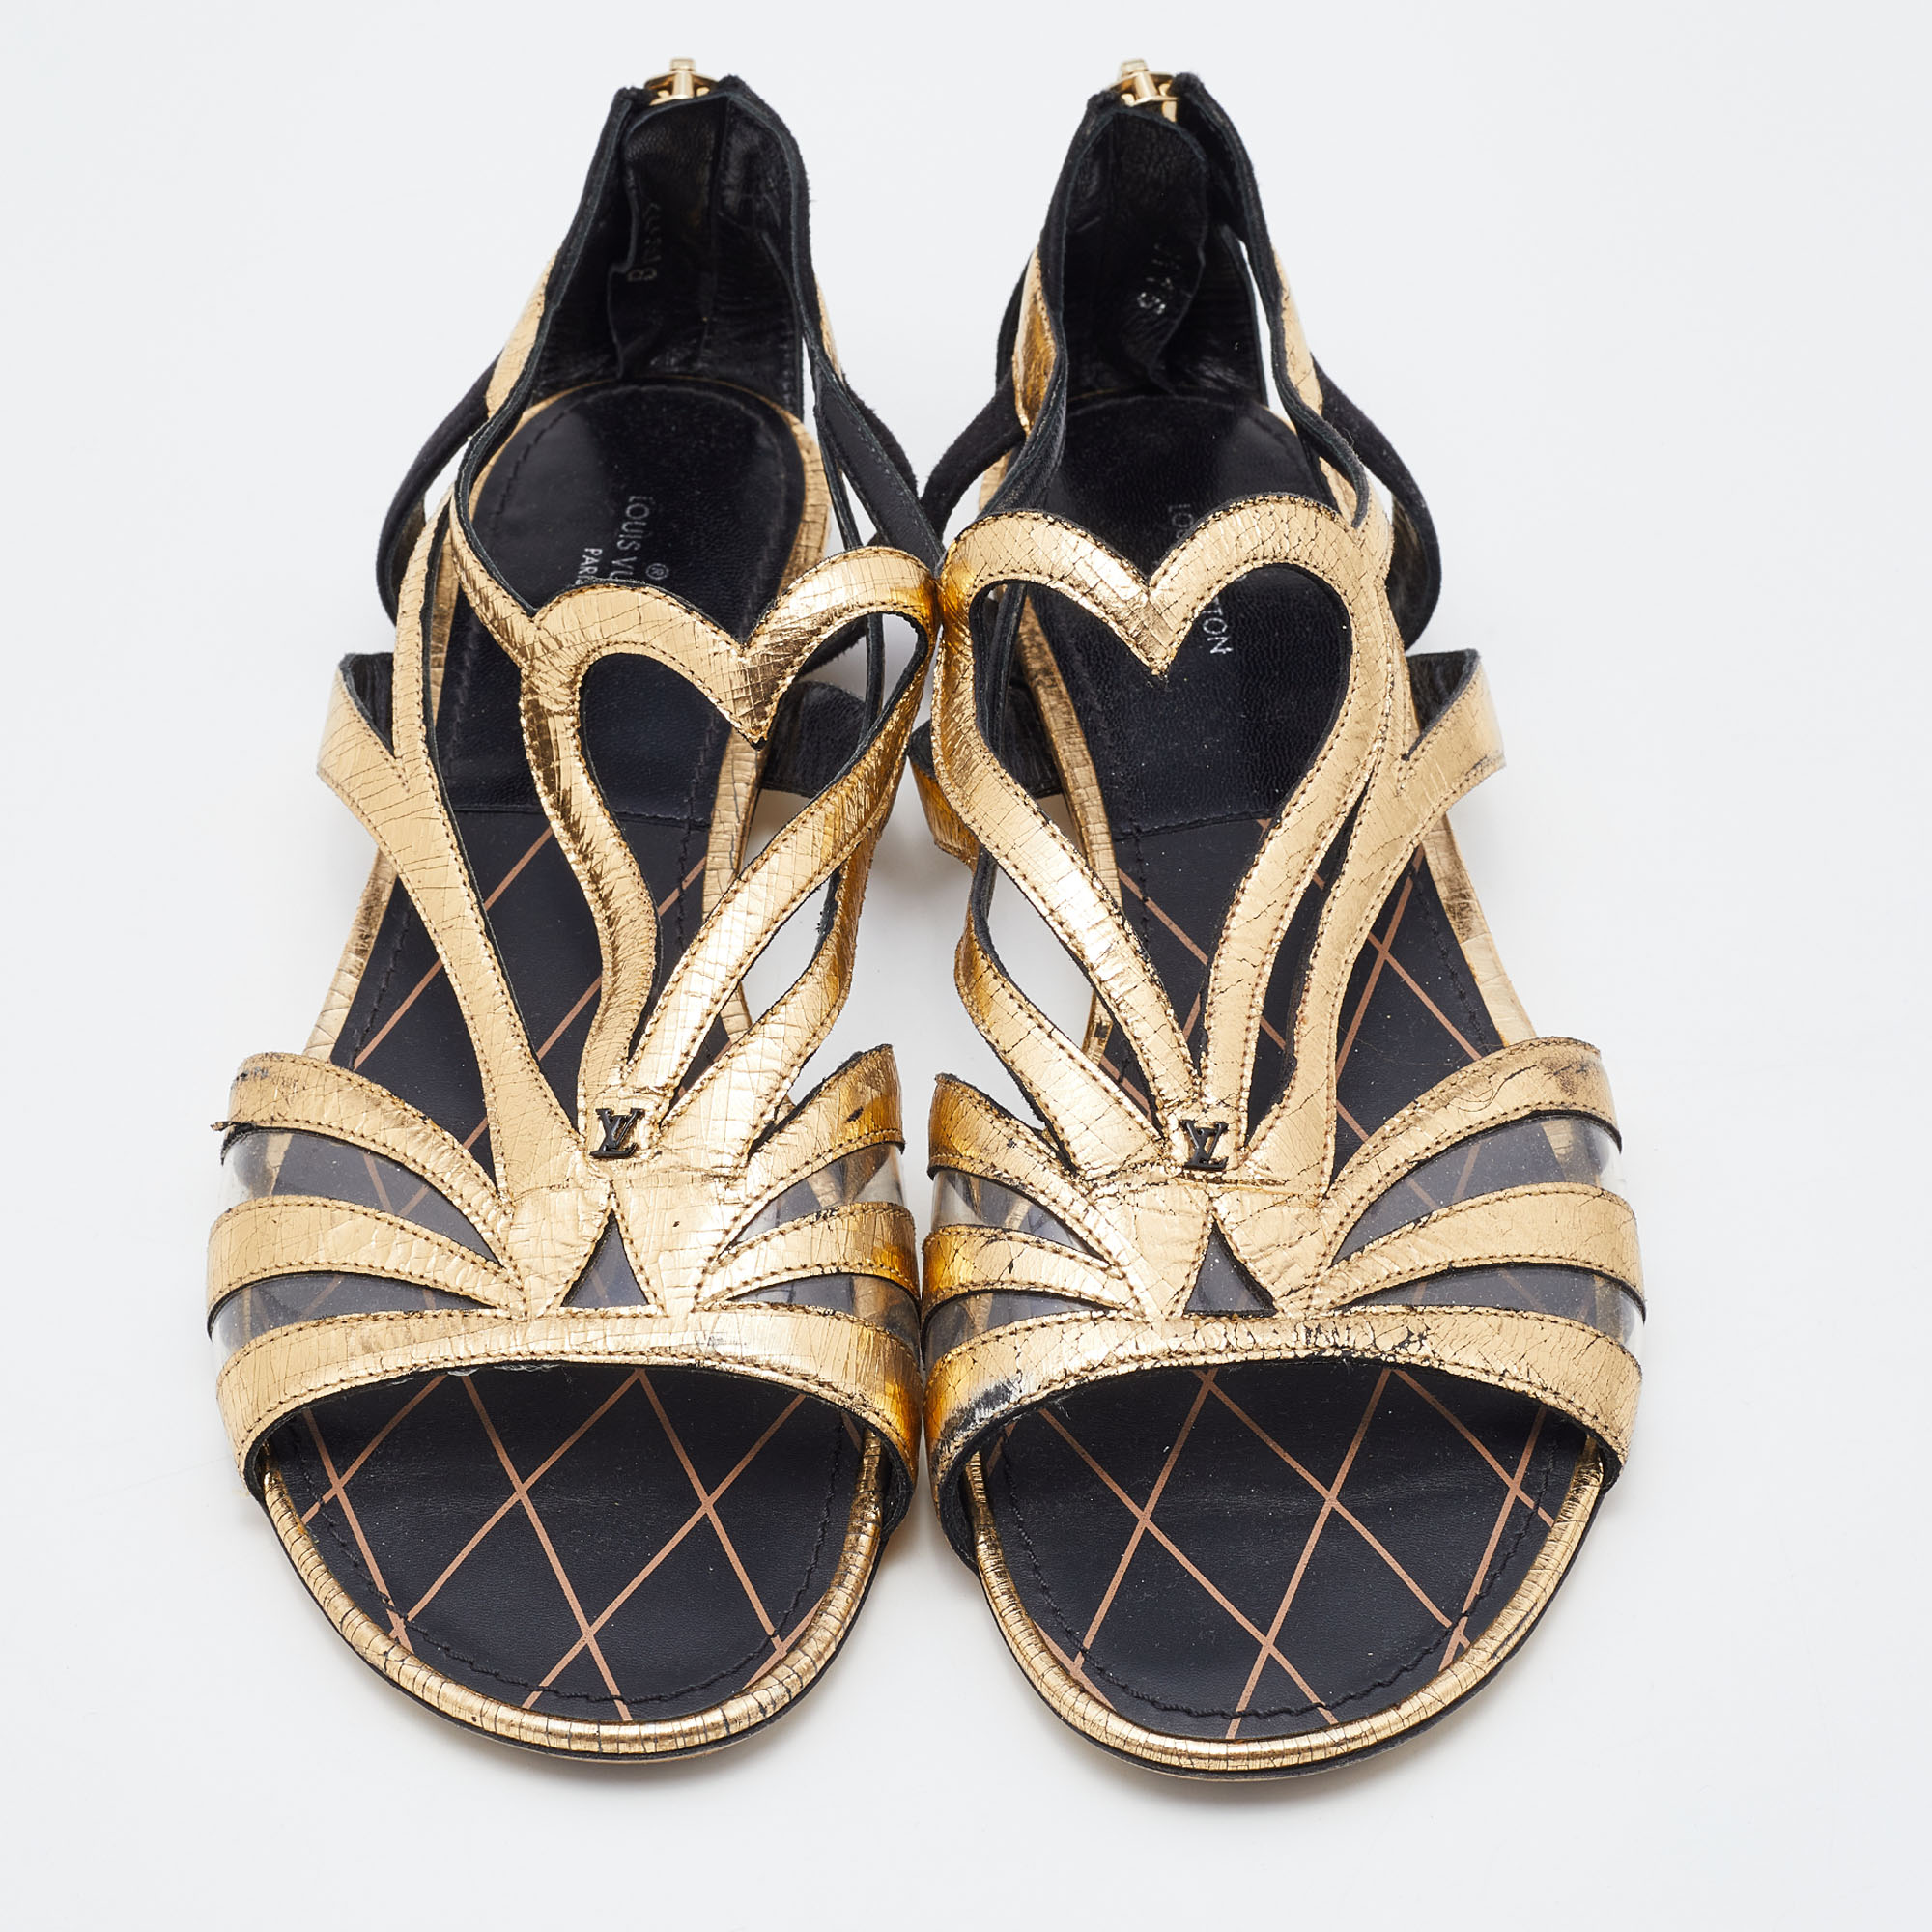 Louis Vuitton Gold/Black Leather, Suede And PVC Strappy Flat Sandals Size 38.5